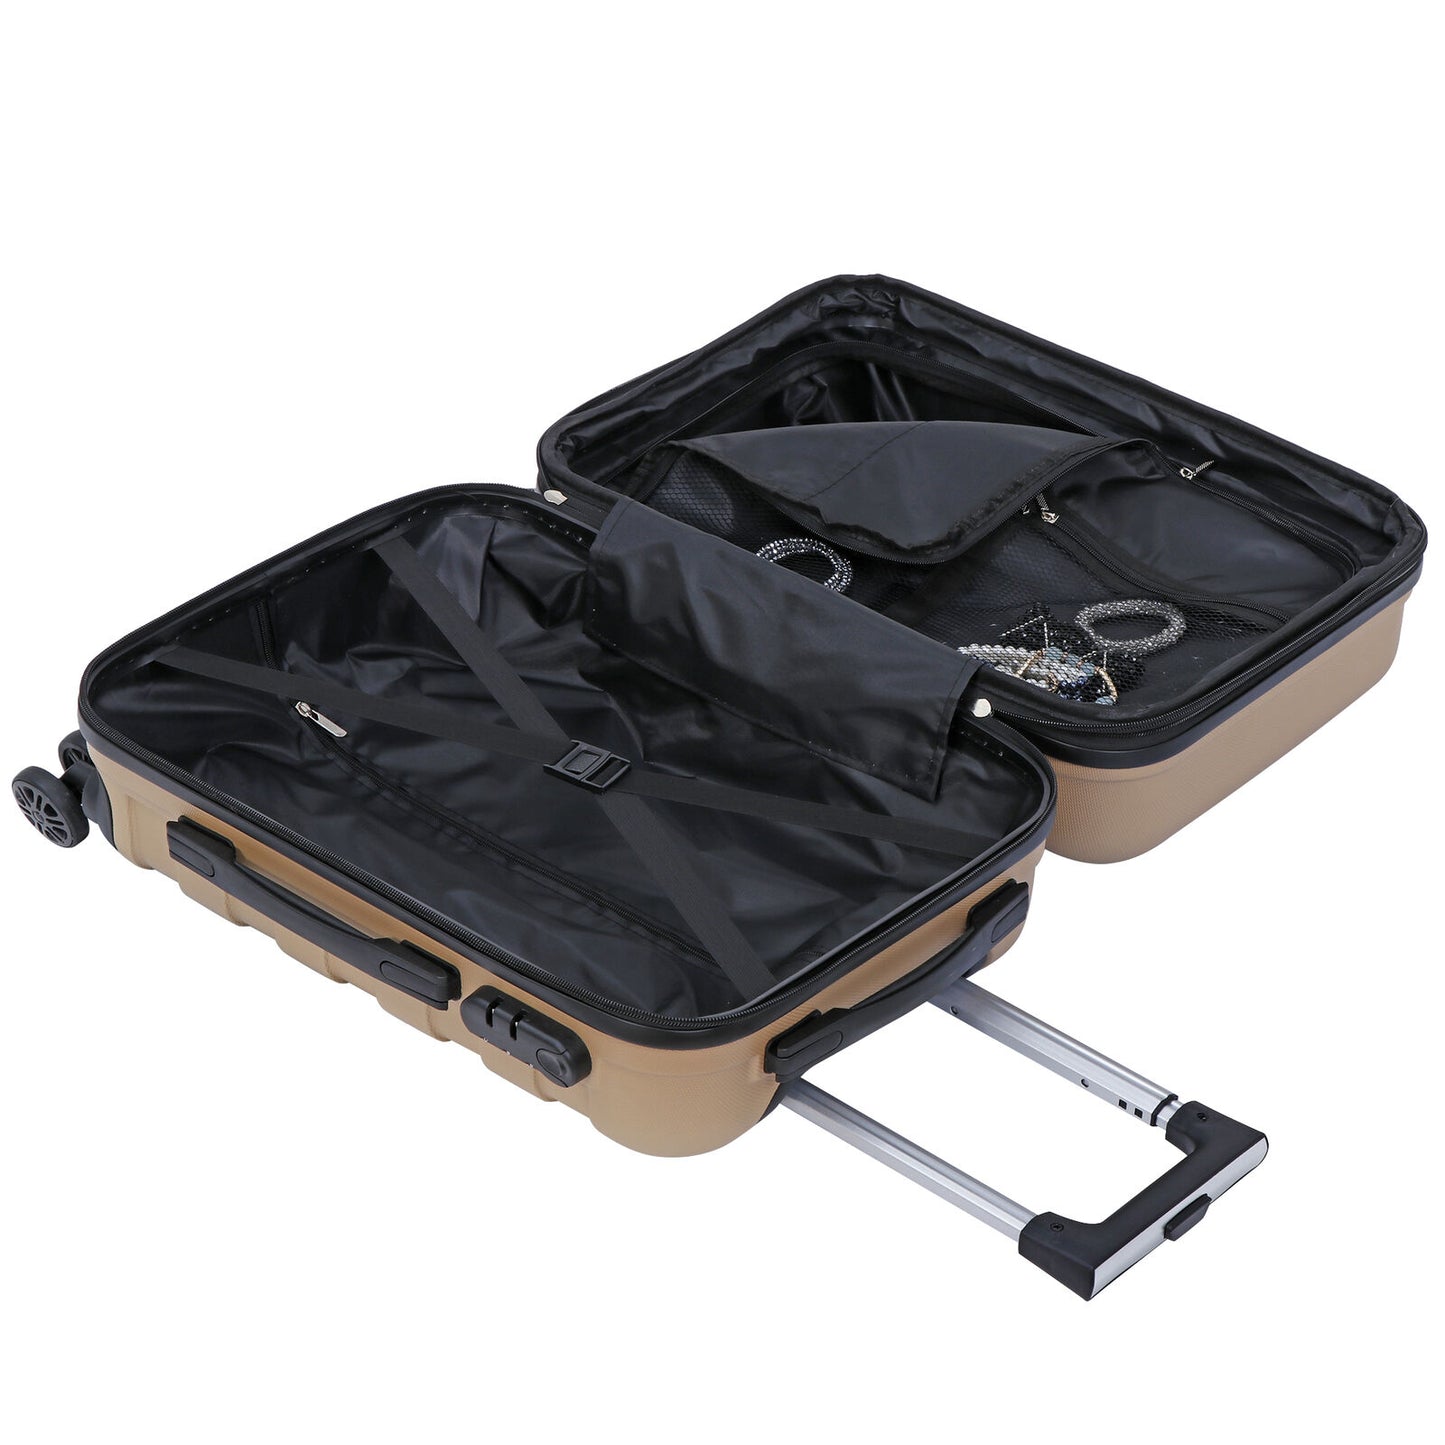 21"Champagne Carry On Luggage Suitcase Expandable Hardside Spinner With 4 Wheels